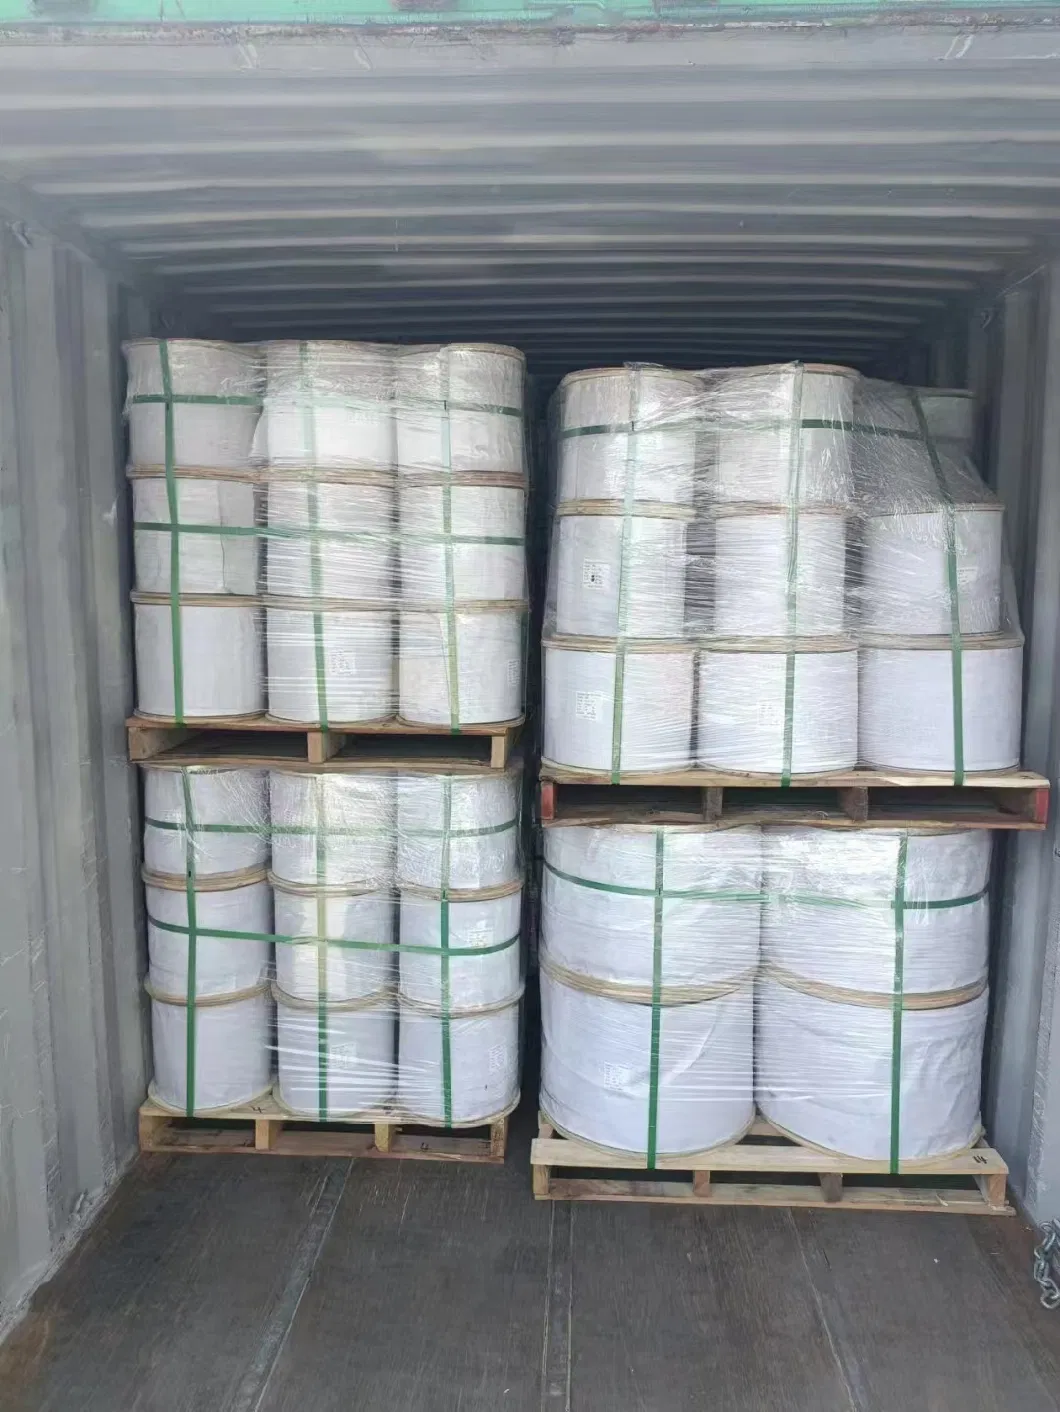 China Manufacturer Hot Selling Galvanized Steel Wire Rope